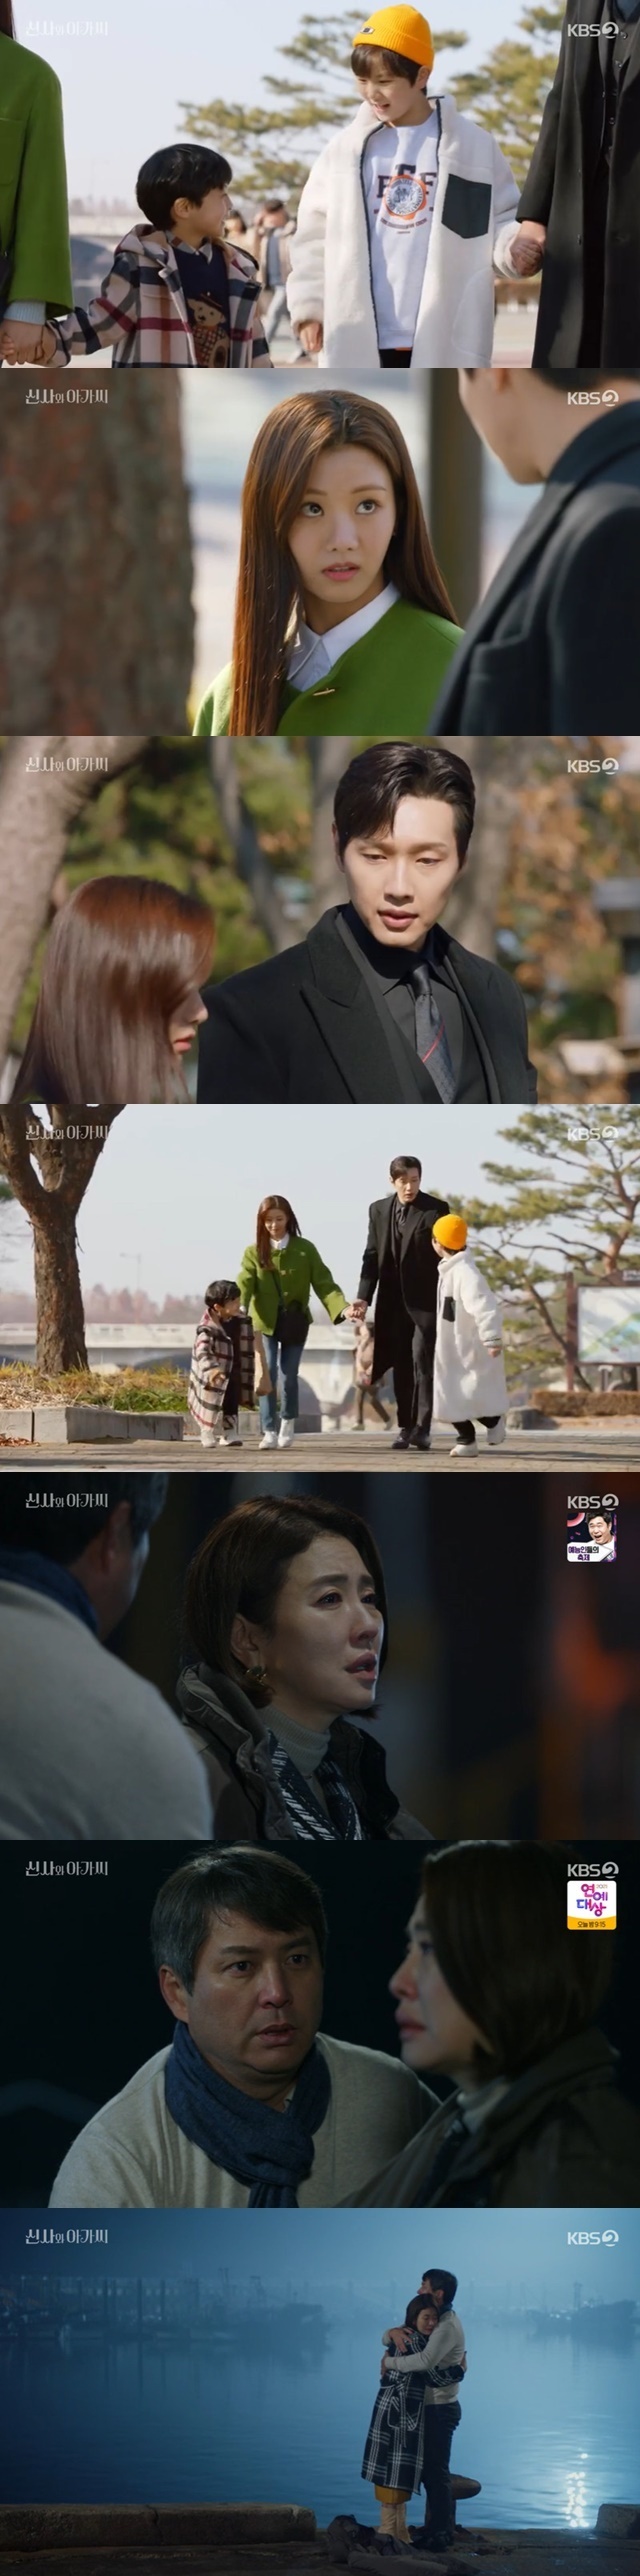 Lee Il-hwa hugged ex-husband Lee Jong-Won who doesnt know him ahead of cancer surgeryOn the 25th of December KBS 2TV weekend Drama Gentleman and Young Lady 27 times (played by Kim Sa-kyung/directed by Shin Chang-seok), Anna Nicole Smith Kim (Lee Il-hwa) embraced her ex-husband Park Soo-cheol (Lee Jong-Won).Lee Young-guk (Ji Hyun-woo) went to a hotel with Josara (Park Ha-na) and found all the memories and informed her of the divorce, angry at the false engagement.Lee Young-guk then tried to call Park Dan-dan (Lee Se-hee) and meet him, but he fell down while crossing the crosswalk.Park moved Lee Young-guk to a hospital and went to take his children, and Lee Young-guk did not remember the last three months of his 22-year-old life after he found consciousness.The investigation, Lee Young-guk, said, It is over now when he found Memory, and informed Wang Dae-ran (Cha Hwa-yeon) about the situation. Wang Dae-ran packed his baggage and fled to Jo Sa-ras house, saying, If the British know I set up, they will die.Lee Se-ryeon (Yoon Jin-i) informed Wang Dae-ran that Lee Yeong-guk has not been able to remember the past three months.Lee Yeong-guk was embarrassed to learn that he was engaged to Jo Sa-ra through his friend Ko Jeong-woo.Lee Young-guk went to Josara to find out the situation and Josa said, At first, my big wife called me. The chairman asked me to help me lose my memory and mess up.I couldnt turn away from the president and the kids, so I tried to help him for a while. The 22-year-old president came to me first and really loved me.Then he proposed to her.The engagement ring we shared is nothing, Josara said.I was engaged in front of people and in front of children. Lee Young-guk continued to lie shamelessly, tearing down, and Lee Young-guk left the room confused by How do you do this when I like Park? Lee Se-ryun informed his nephews that Lee Young-guk could not remember the past three months, and Park Dan-dan heard it.Park asked Lee Young-guk, Why did you accept my heart while you were dating Chief Chief? Lee Young-guk said, I have never been with Chief Chief.I never played with Parks mind, he said, but Im the one who is engaged to the chief of staff and is responsible for this situation.Park Dan-dan said with tears that he would quit as of tomorrow, and Lee Se-chan (Yoo Jun-seo) overheard the conversation.Lee said, I really loved my teacher and Father, but Father was engaged to the chief of staff while he lost Memory?We like Father and the teacher so much, but we cant let them break up like this.I will make sure they get back together. He and his brother Lee sejong (Seo Woo-jin) held a protest with all of Park Dan-dans clothes, bags and shoes hidden.Park Dan-dan could not go out and decided to stay for three more months under the contract.Anna Nicole Smith Kim (Lee Il-hwa) tearfully told her biological daughter, Park Dan-dan, that she had cooked rice and that I was finally cooking rice for my daughter, ahead of the surgery for stomach cancer.Park Dan-dan thought that Anna Nicole Smith Kim had a sad story without knowing that she was my biological mother, and then Anna Nicole Smith-Kim went to write a will.Lee Se-ryun forced her to start a part-time job at Park Soo-cheols chicken house to marriage with Park Dae-beom (Ahn Woo-yeon).